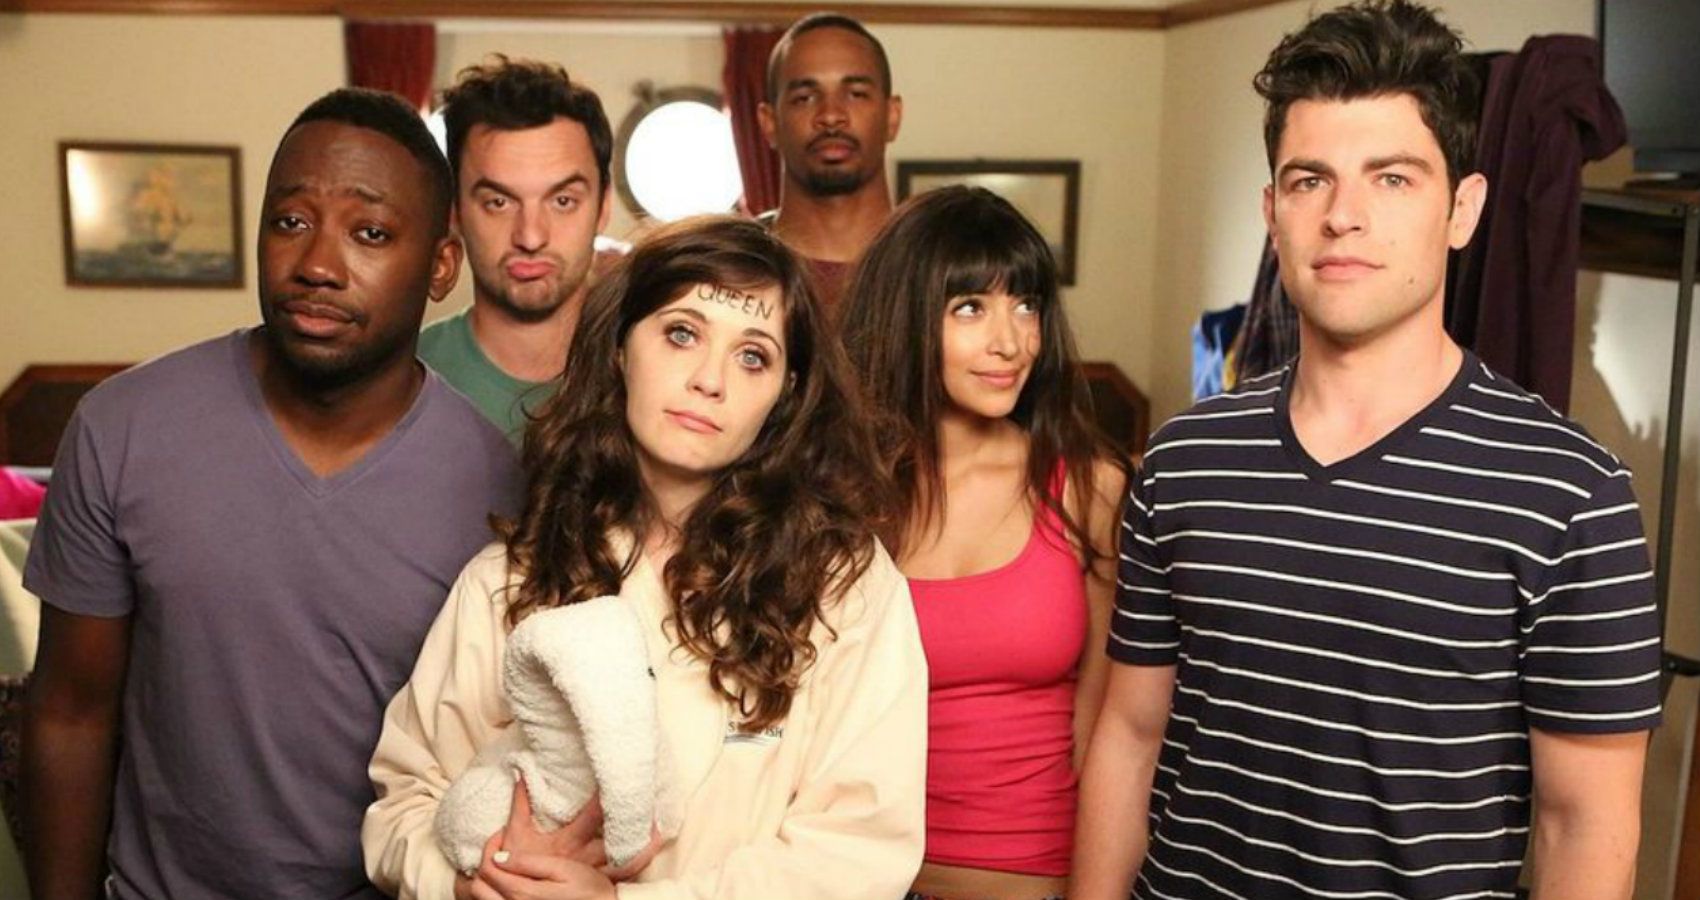 Bs to new girl